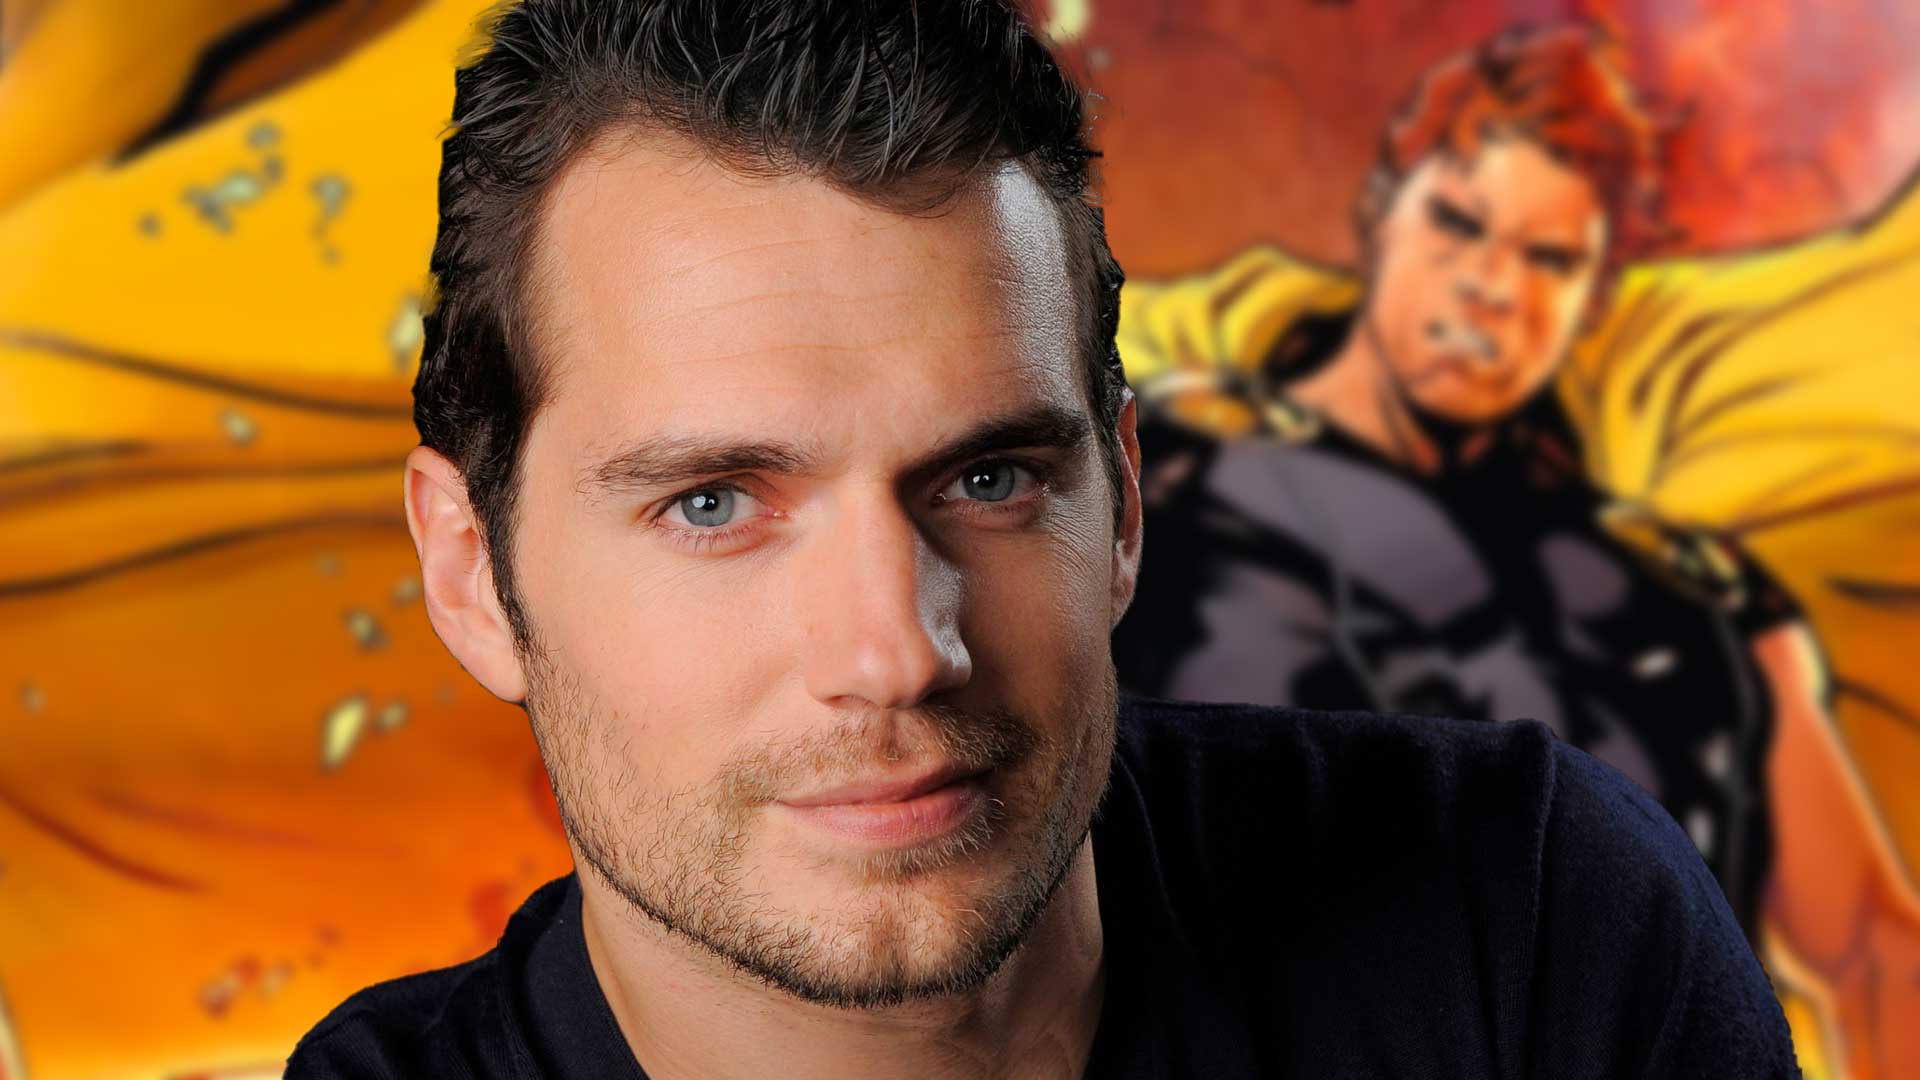 Crazy Rumor That Henry Cavill Will Play Wolverine In Captain Marvel 2 Goes  Viral, Debunked